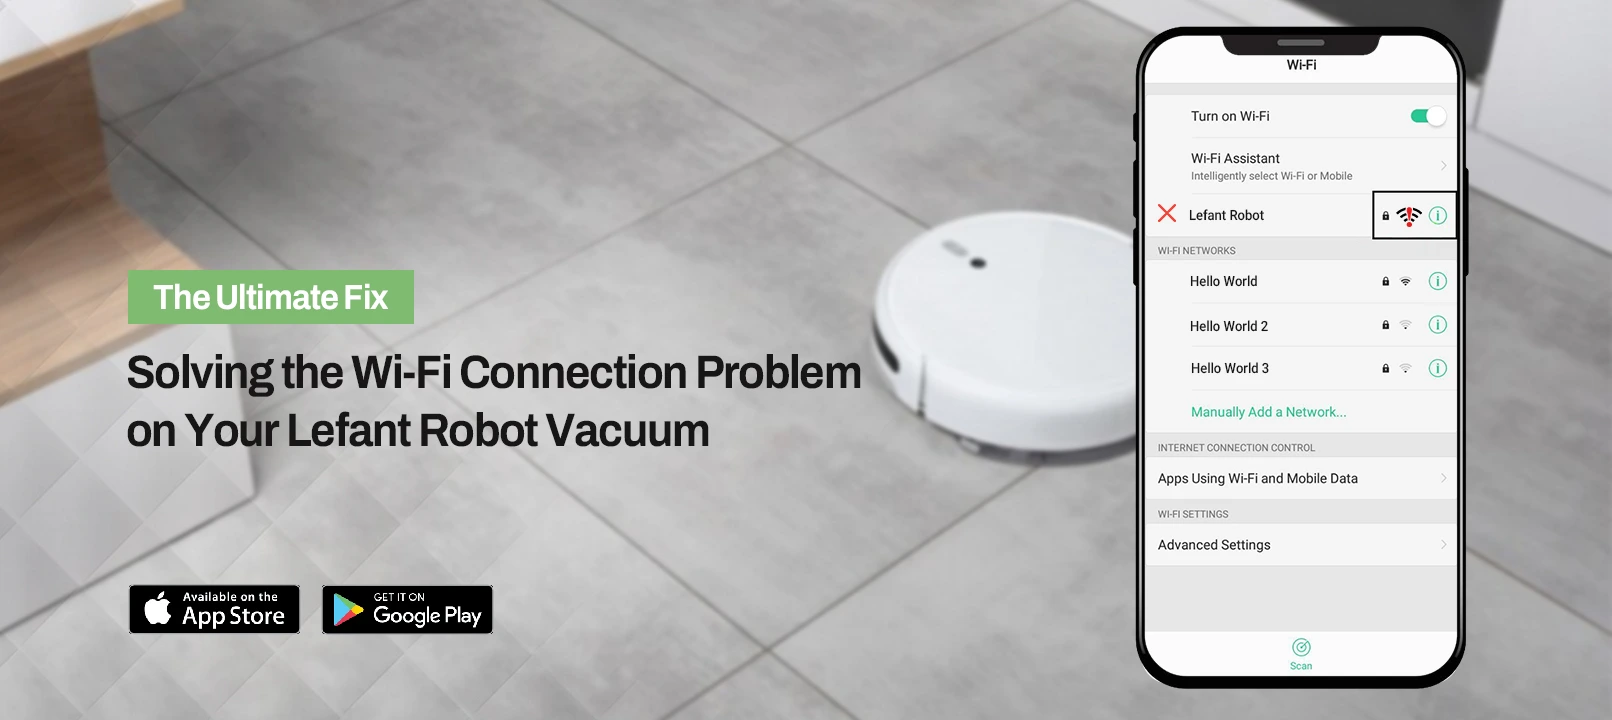 Lefant Robot Vacuum Not Connecting to WiFi: Troubleshoot here